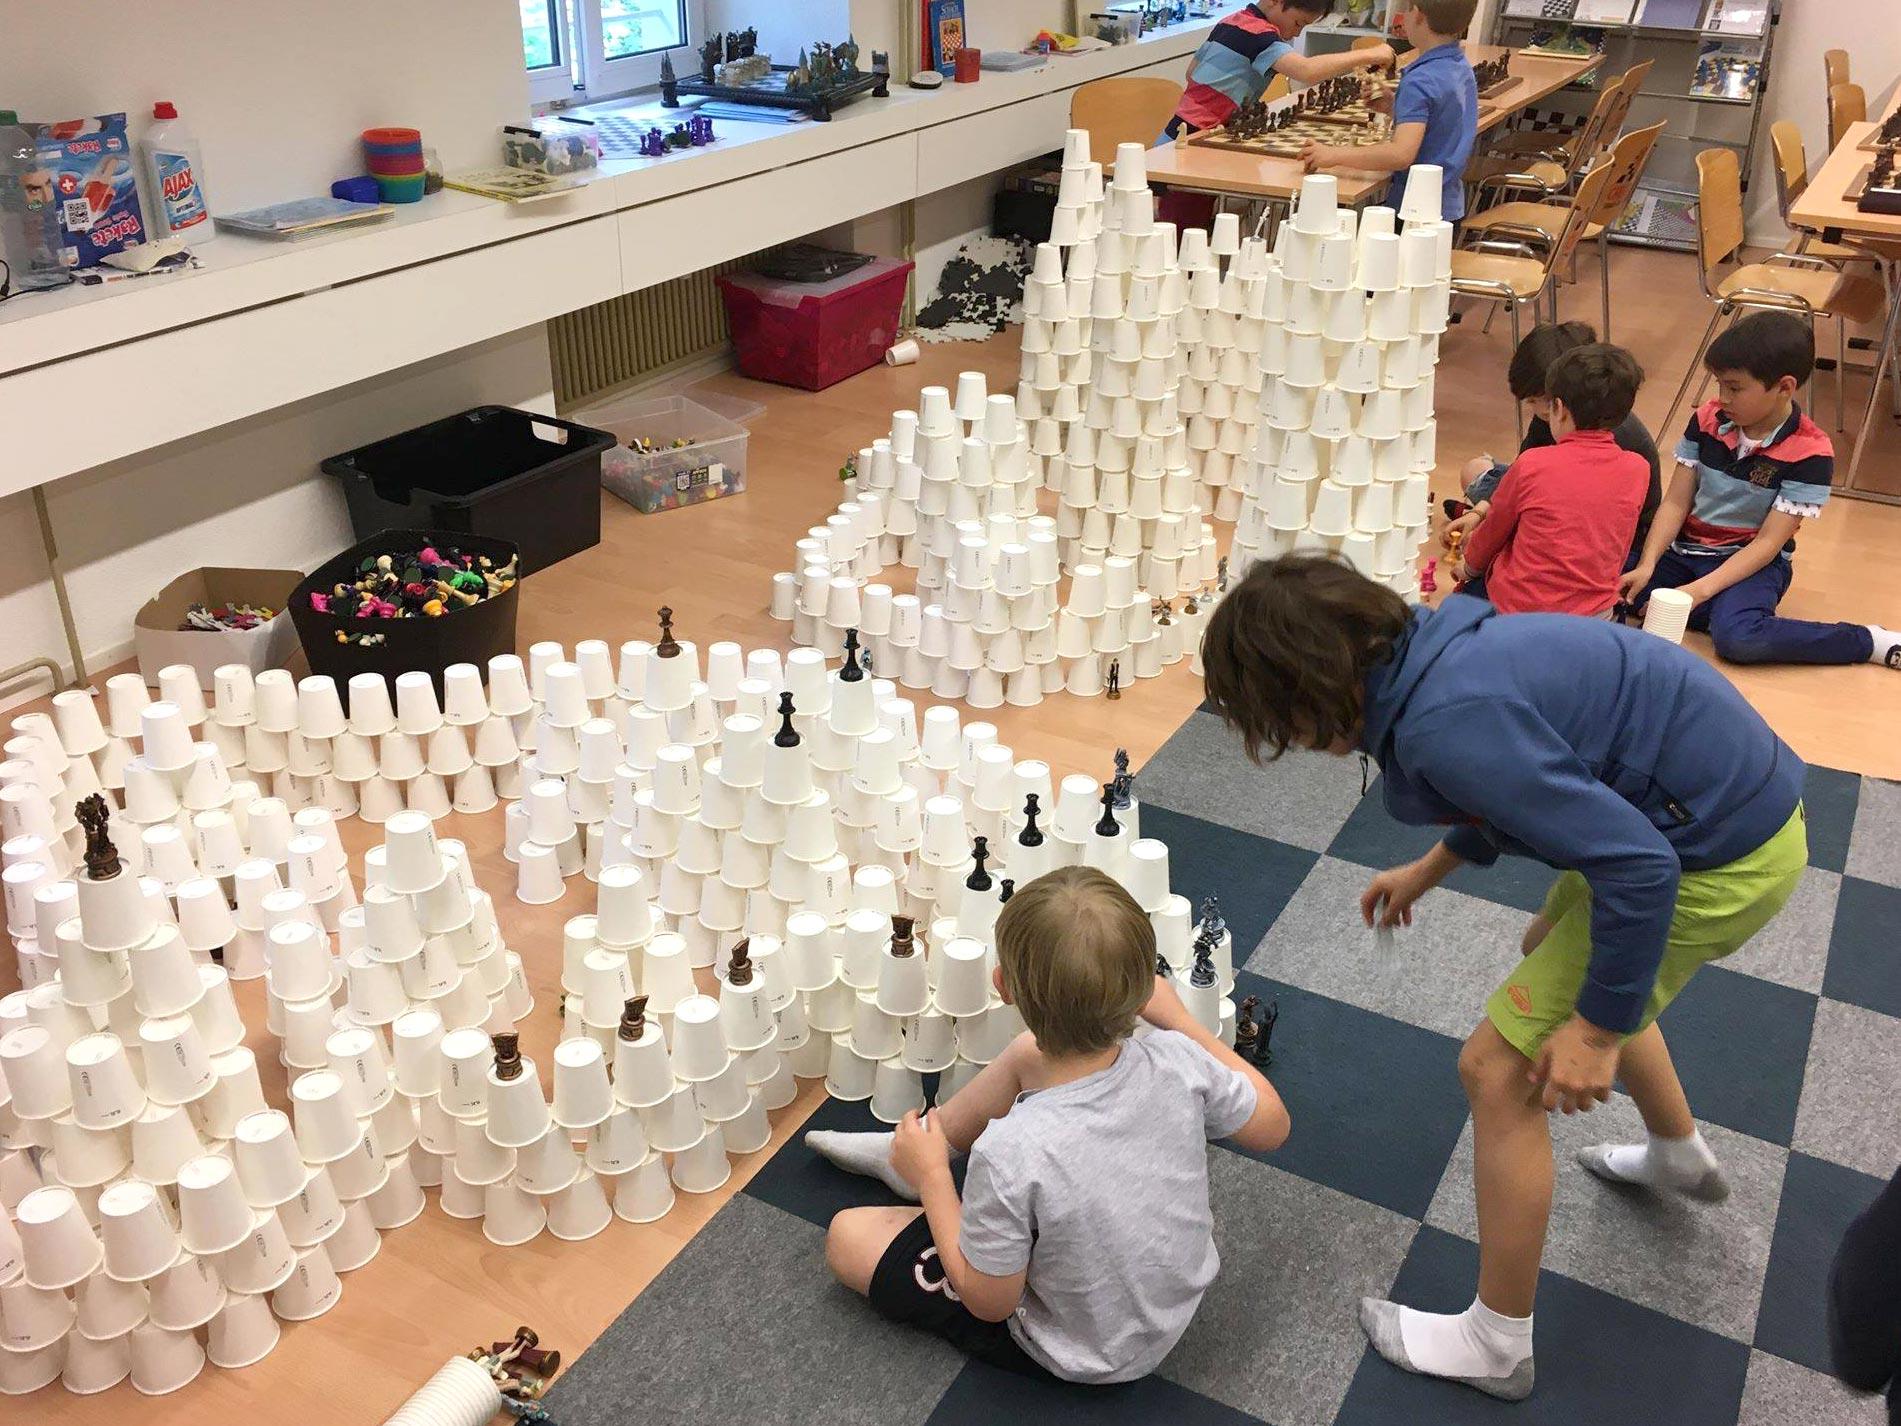 Kids building a tower from cardboard mugs